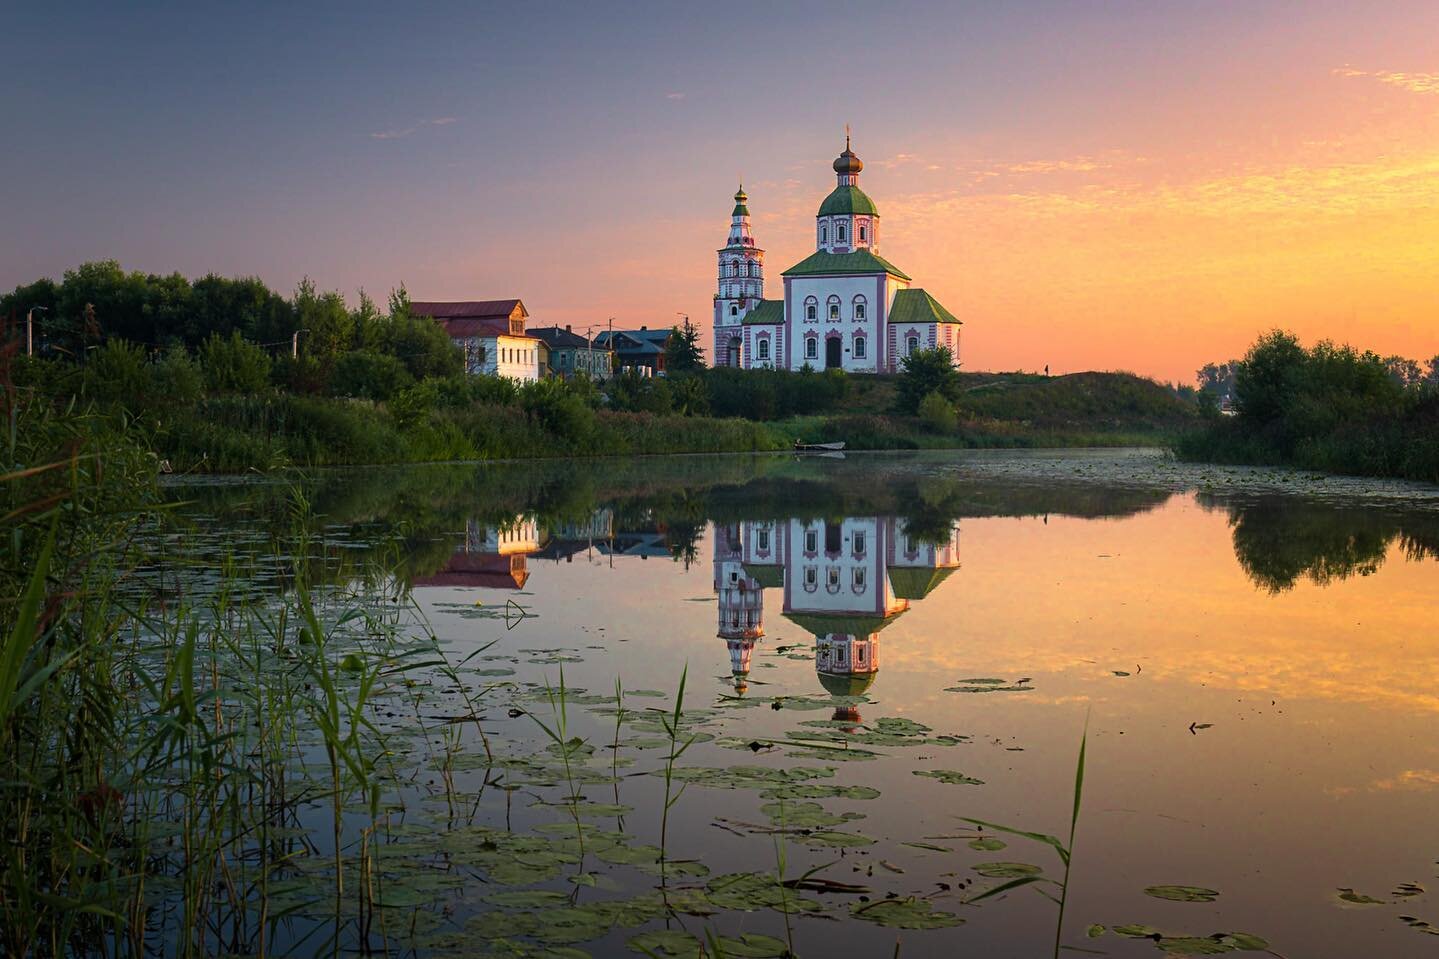 One day in Suzdal, Russia.
From morning sunrise to night.

#suzdal #suzdalrussia